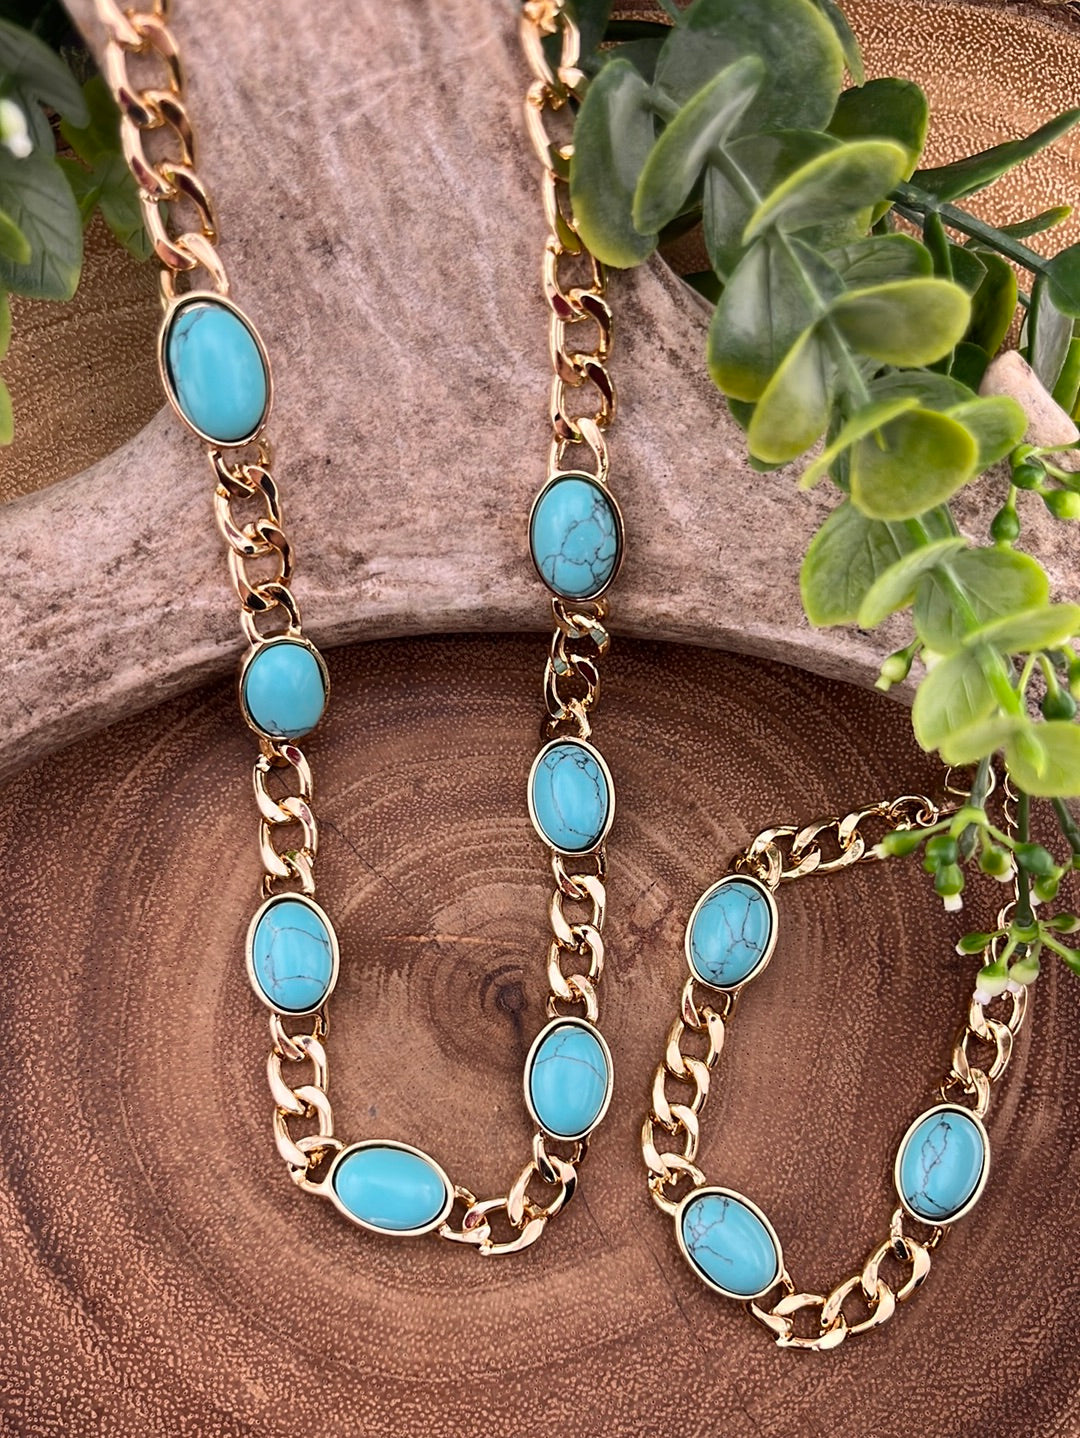 Fashion Gold Link Necklace & Bracelet With Oval Stones - Turquoise